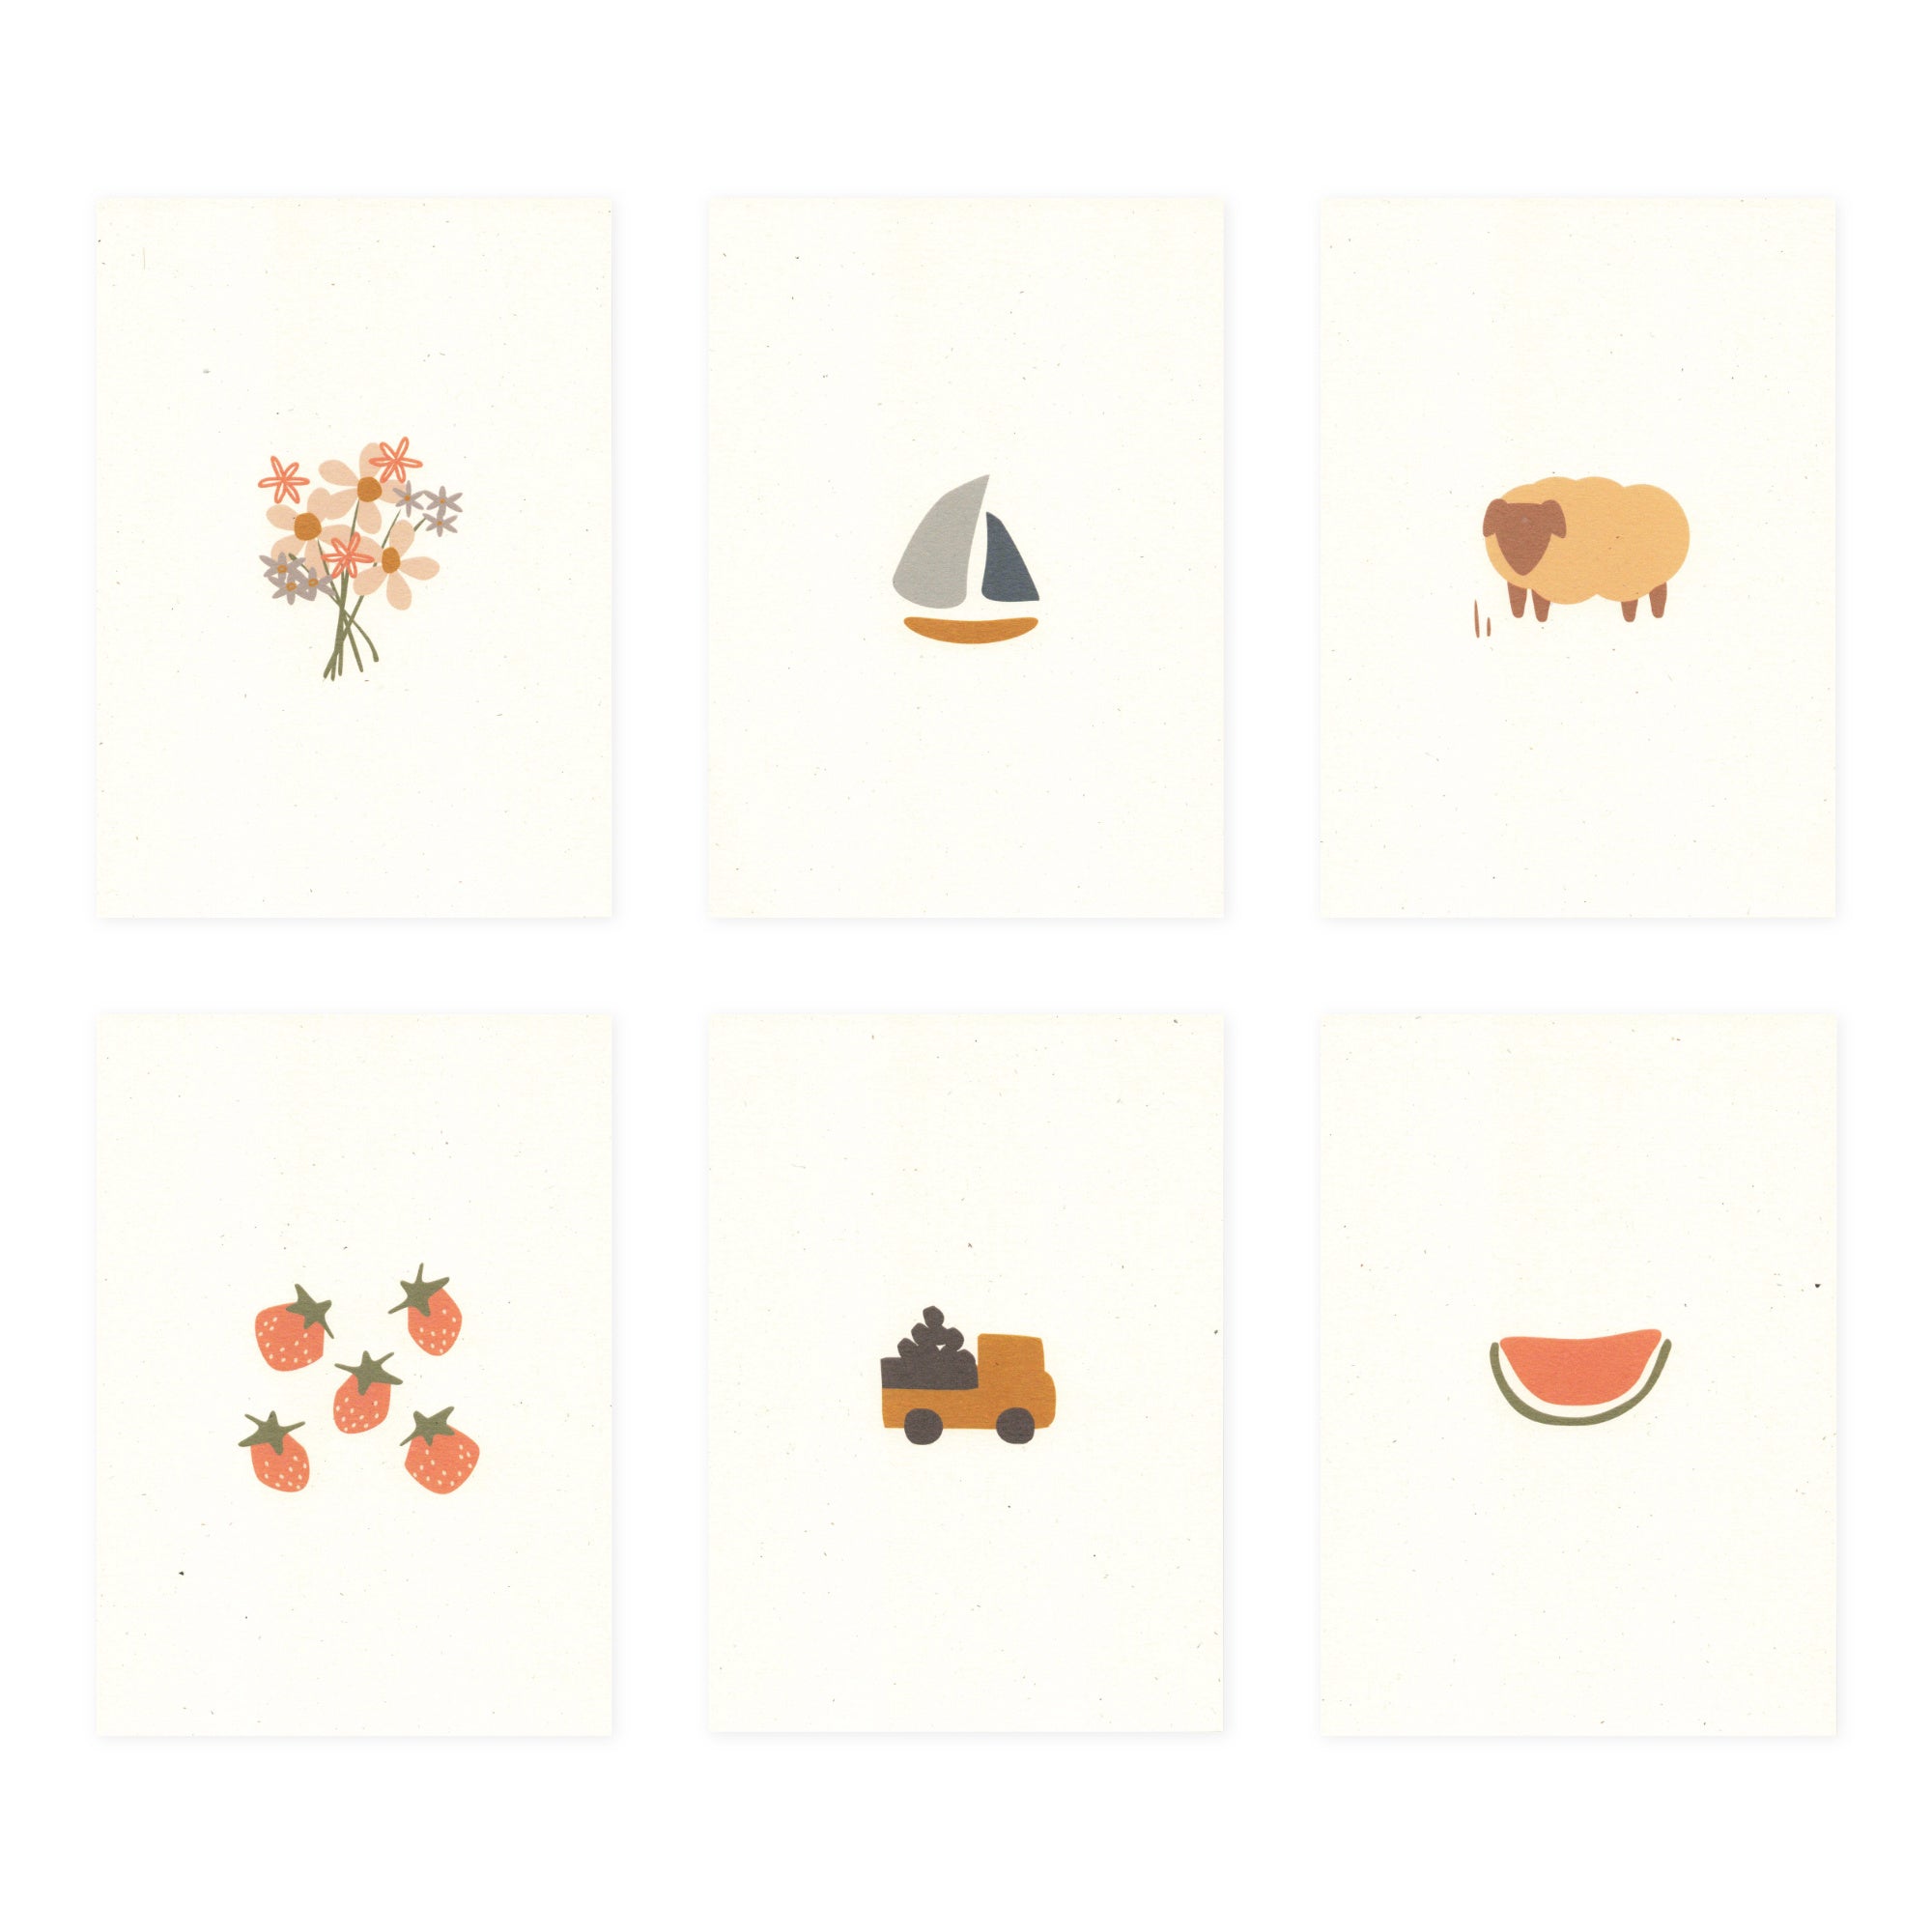 Six cute nursery prints on recycled, natural paper. The prints show: a bouquet of flowers, a small sailboat, a brown sheep, five strawberries, a small dump truck carrying boulders, and a slice of watermelon.